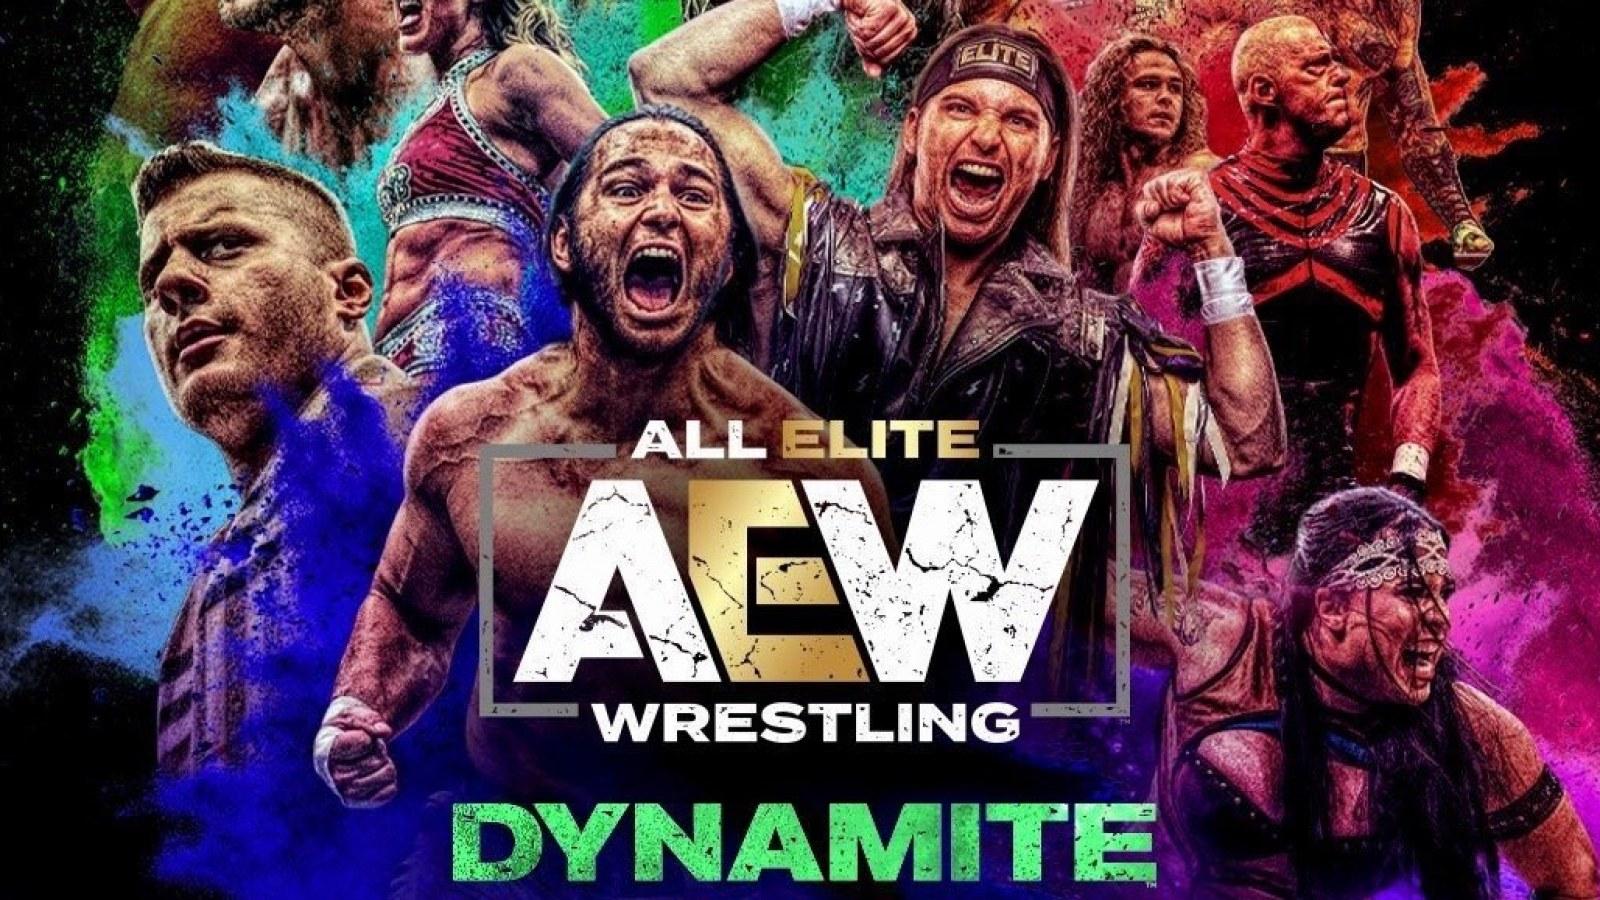 How to Watch AEW 'Dynamite': All Elite Wrestling Comes to TNT